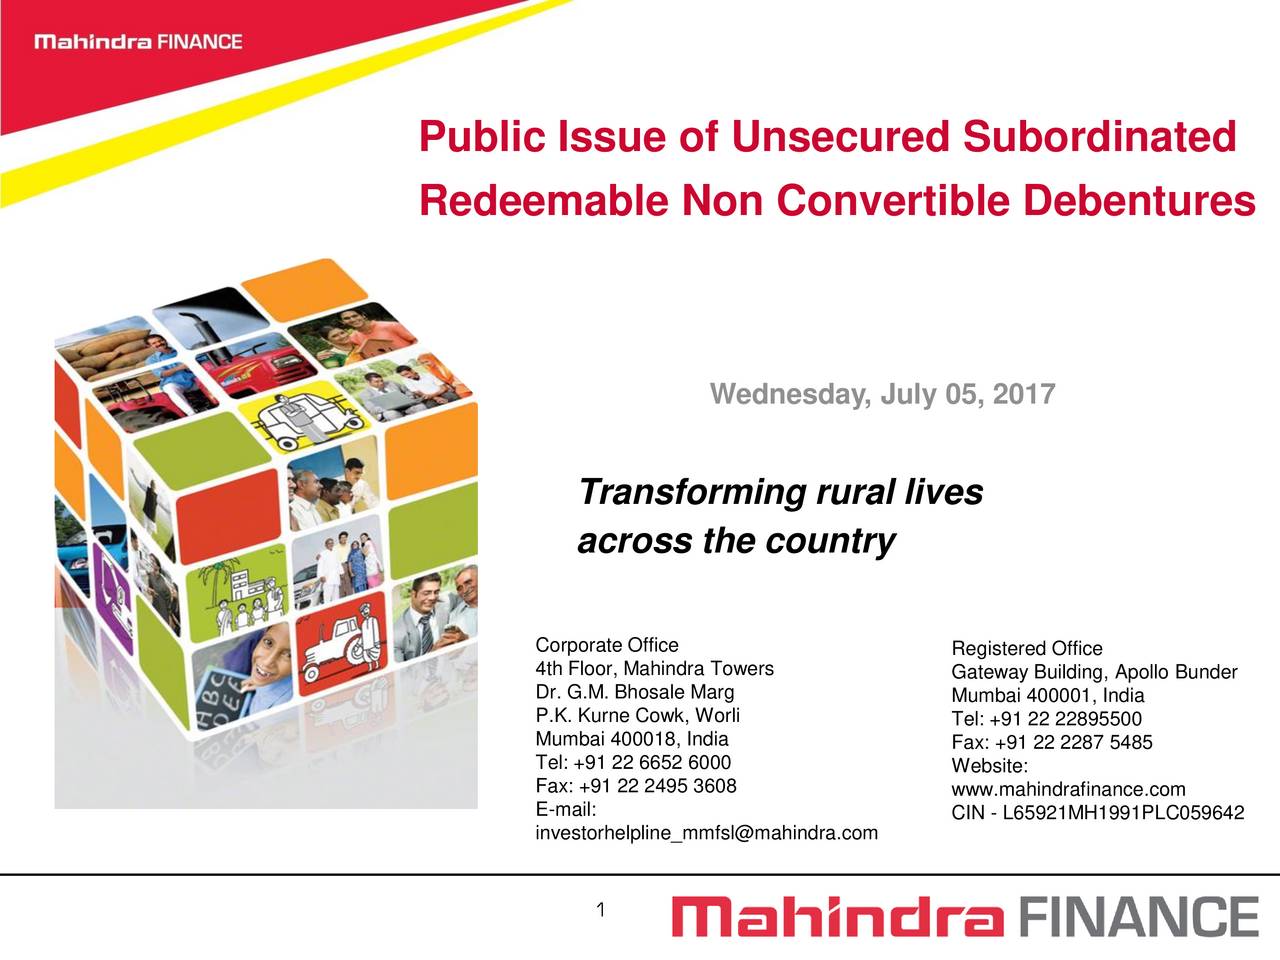 Public Issue of Unsecured Subordinated